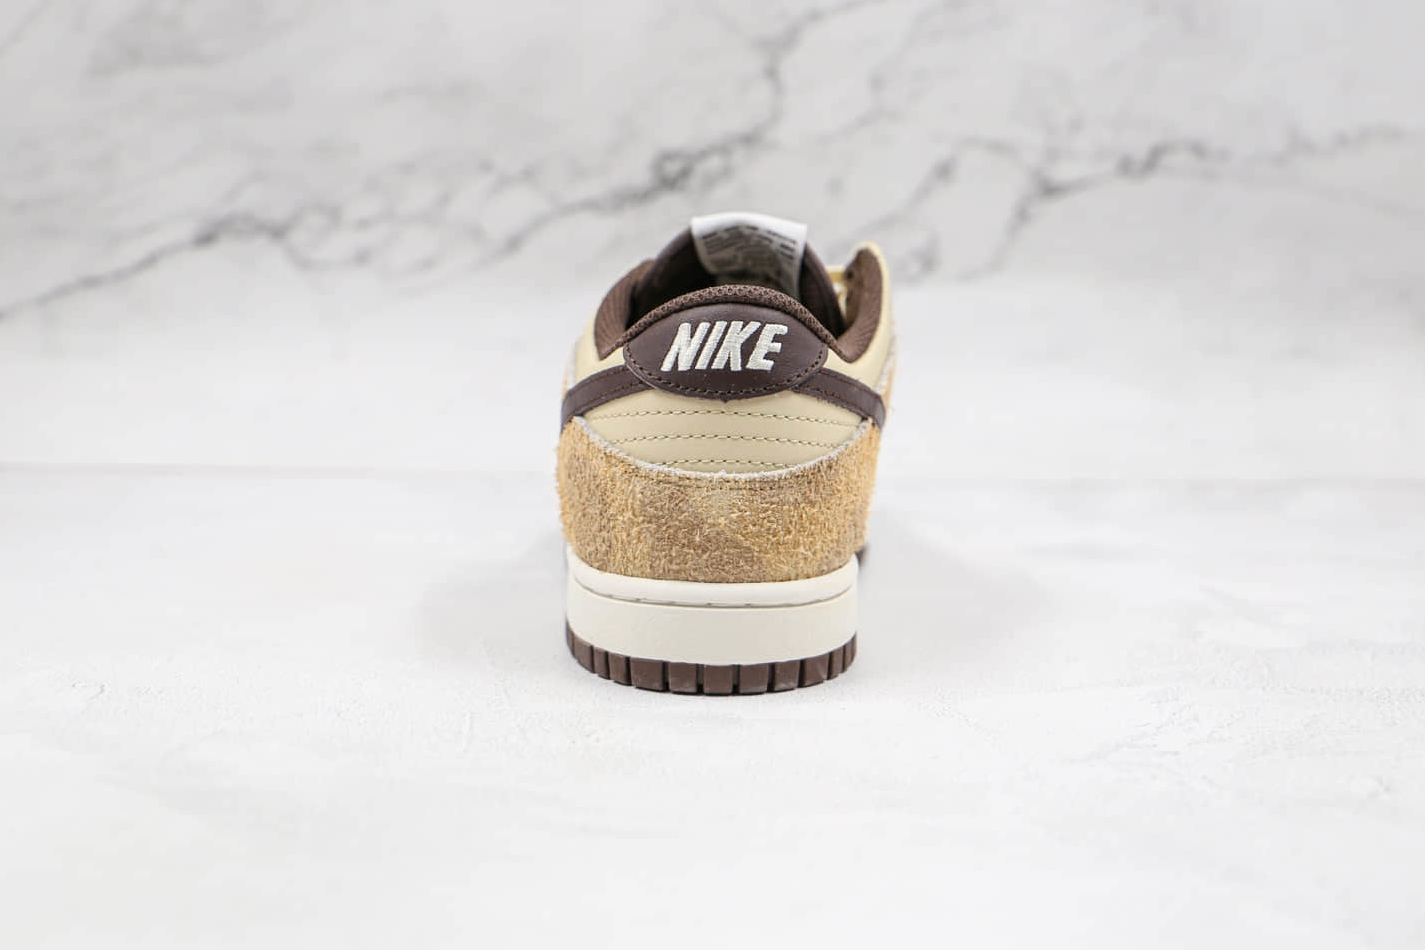 Nike Dunk Low Premium 'Animal Pack - Cheetah' DH7913-200 | Limited Edition Sneakers